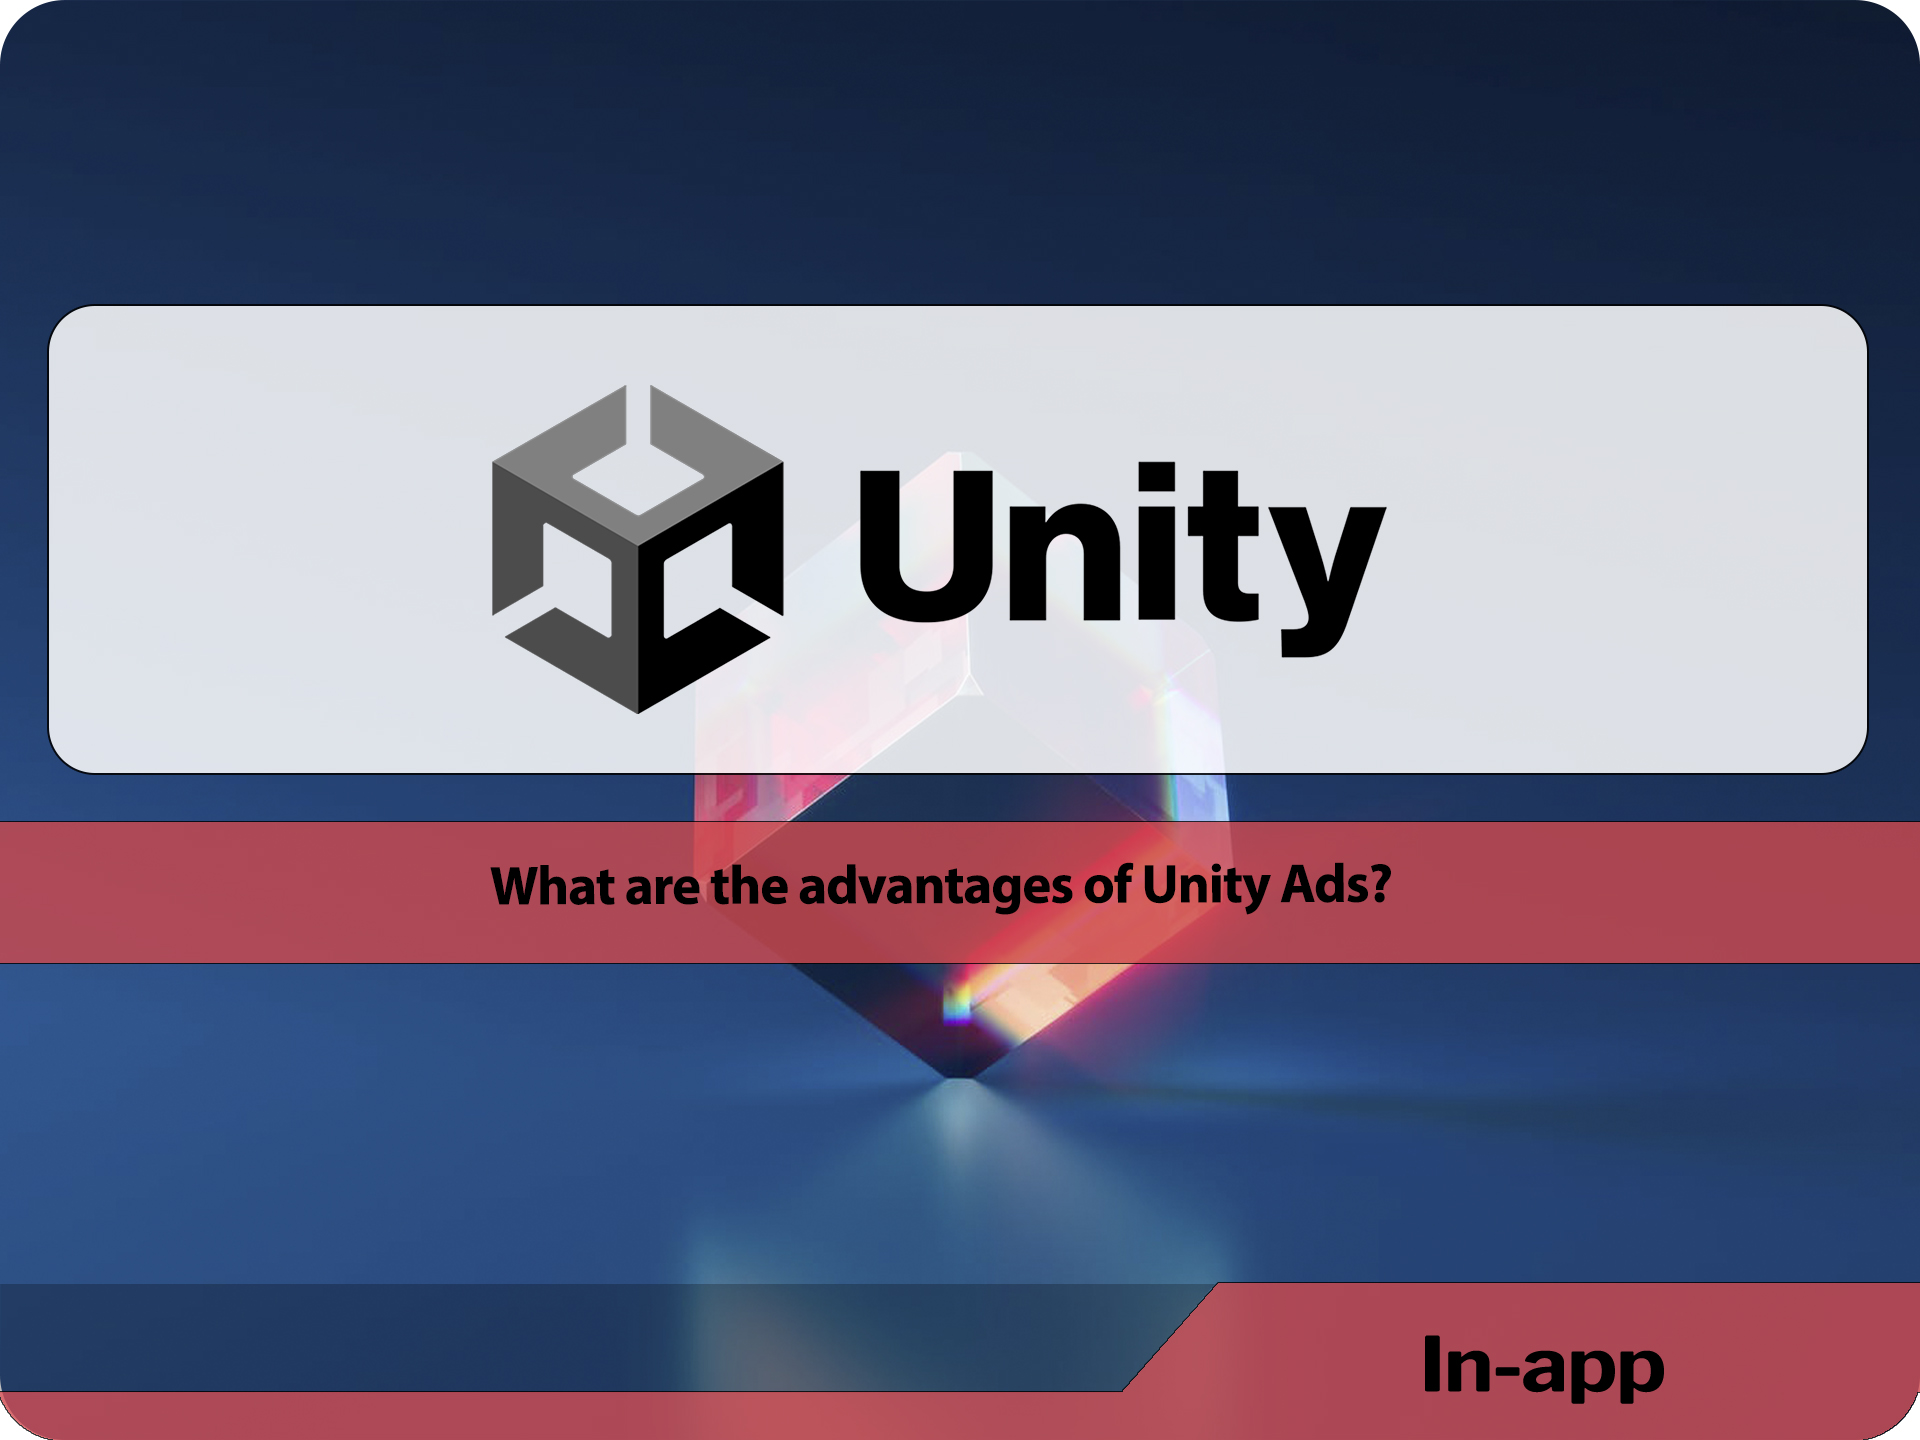 What are the advantages of Unity Ads?